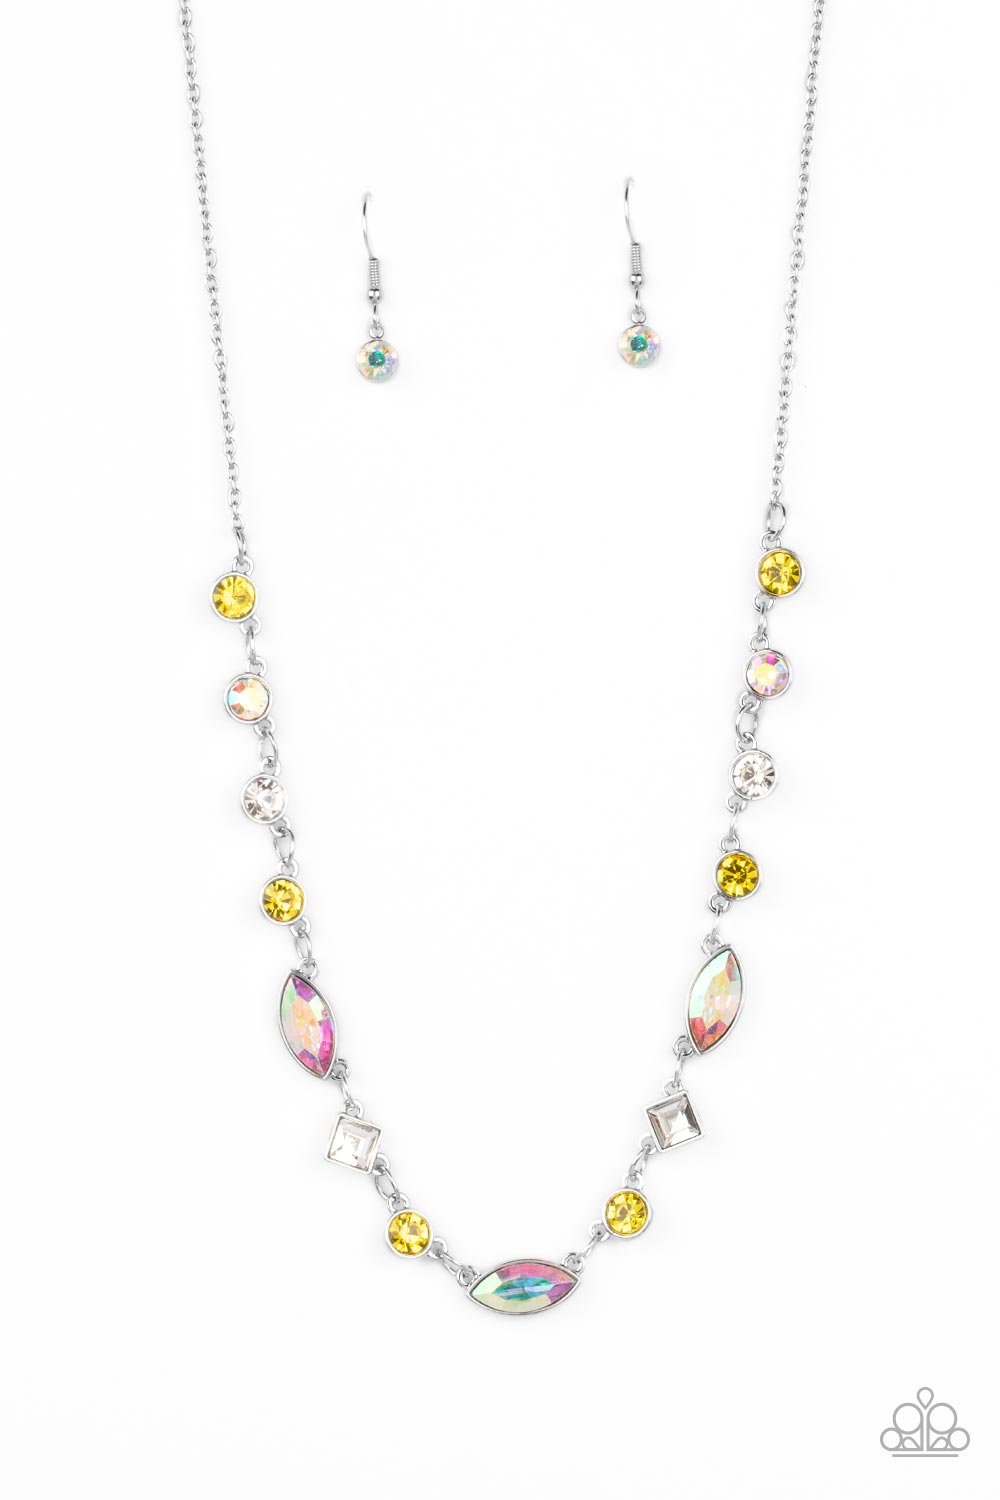 Paparazzi Irresistible HEIR-idescence - Yellow Necklace